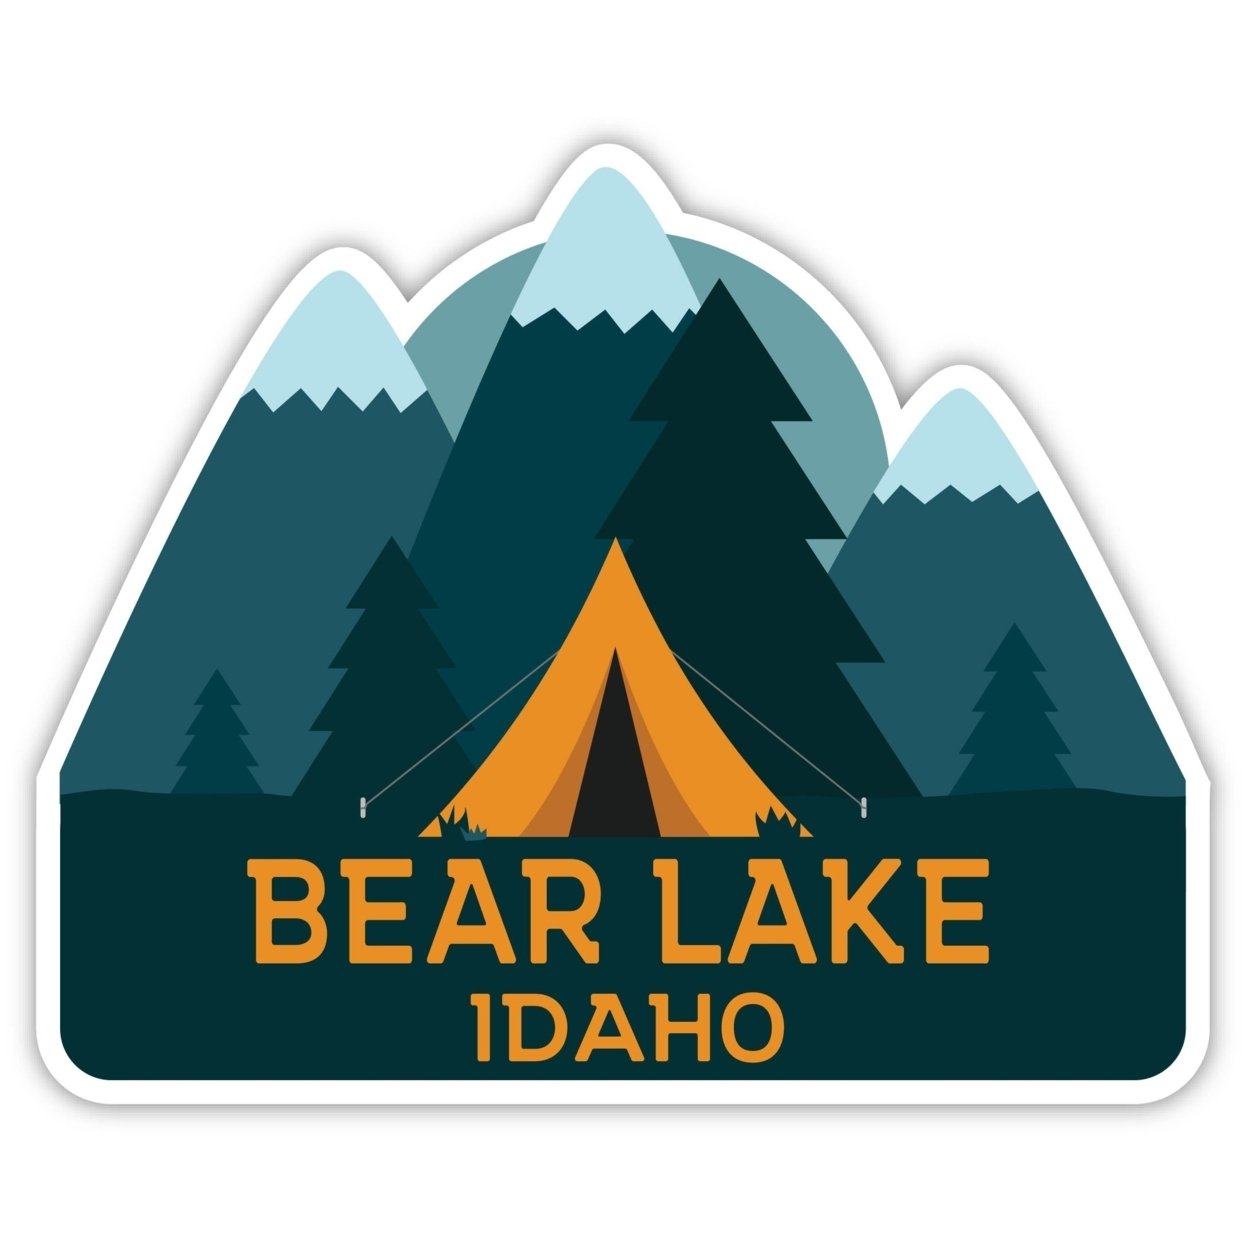 Bear Lake Idaho Souvenir Decorative Stickers (Choose Theme And Size) - 4-Pack, 10-Inch, Tent